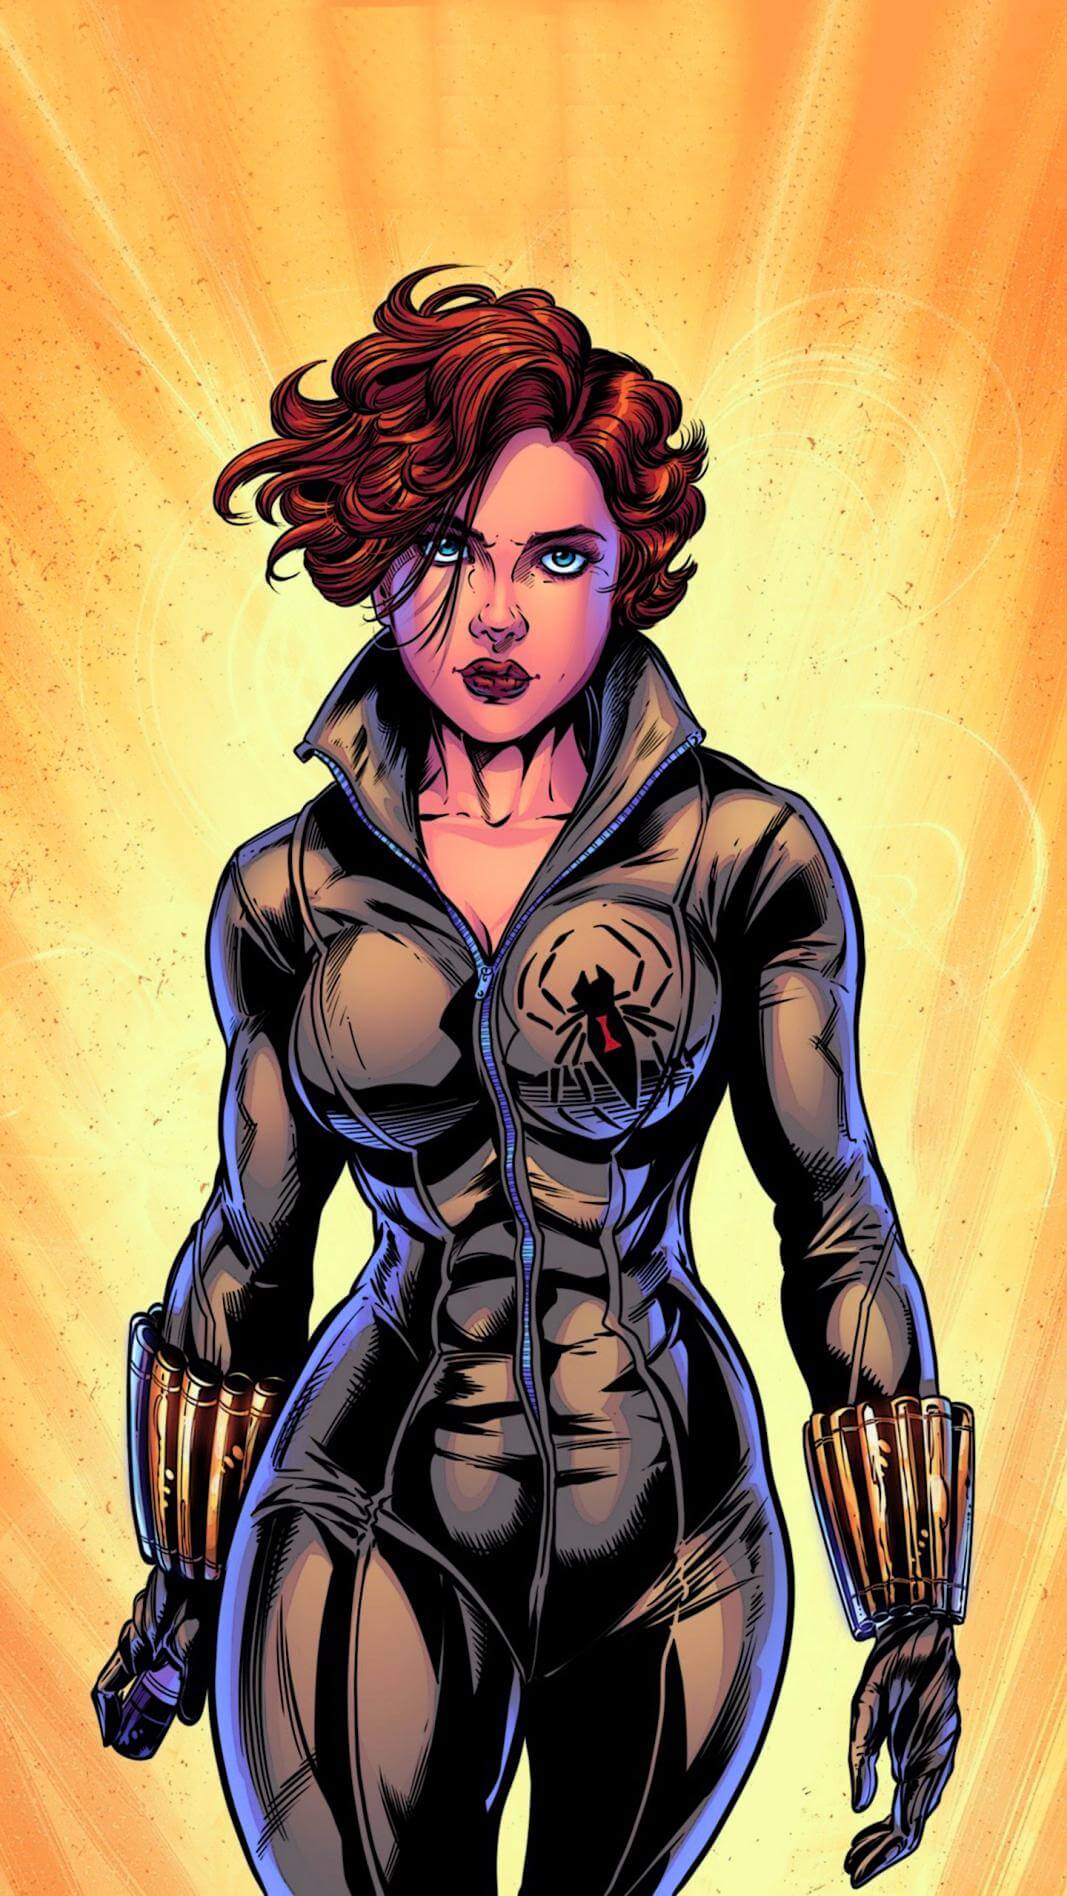 49 Hottest Black Widow Bikini Pictures Which Will Drive You Nuts For Her | Best Of Comic Books